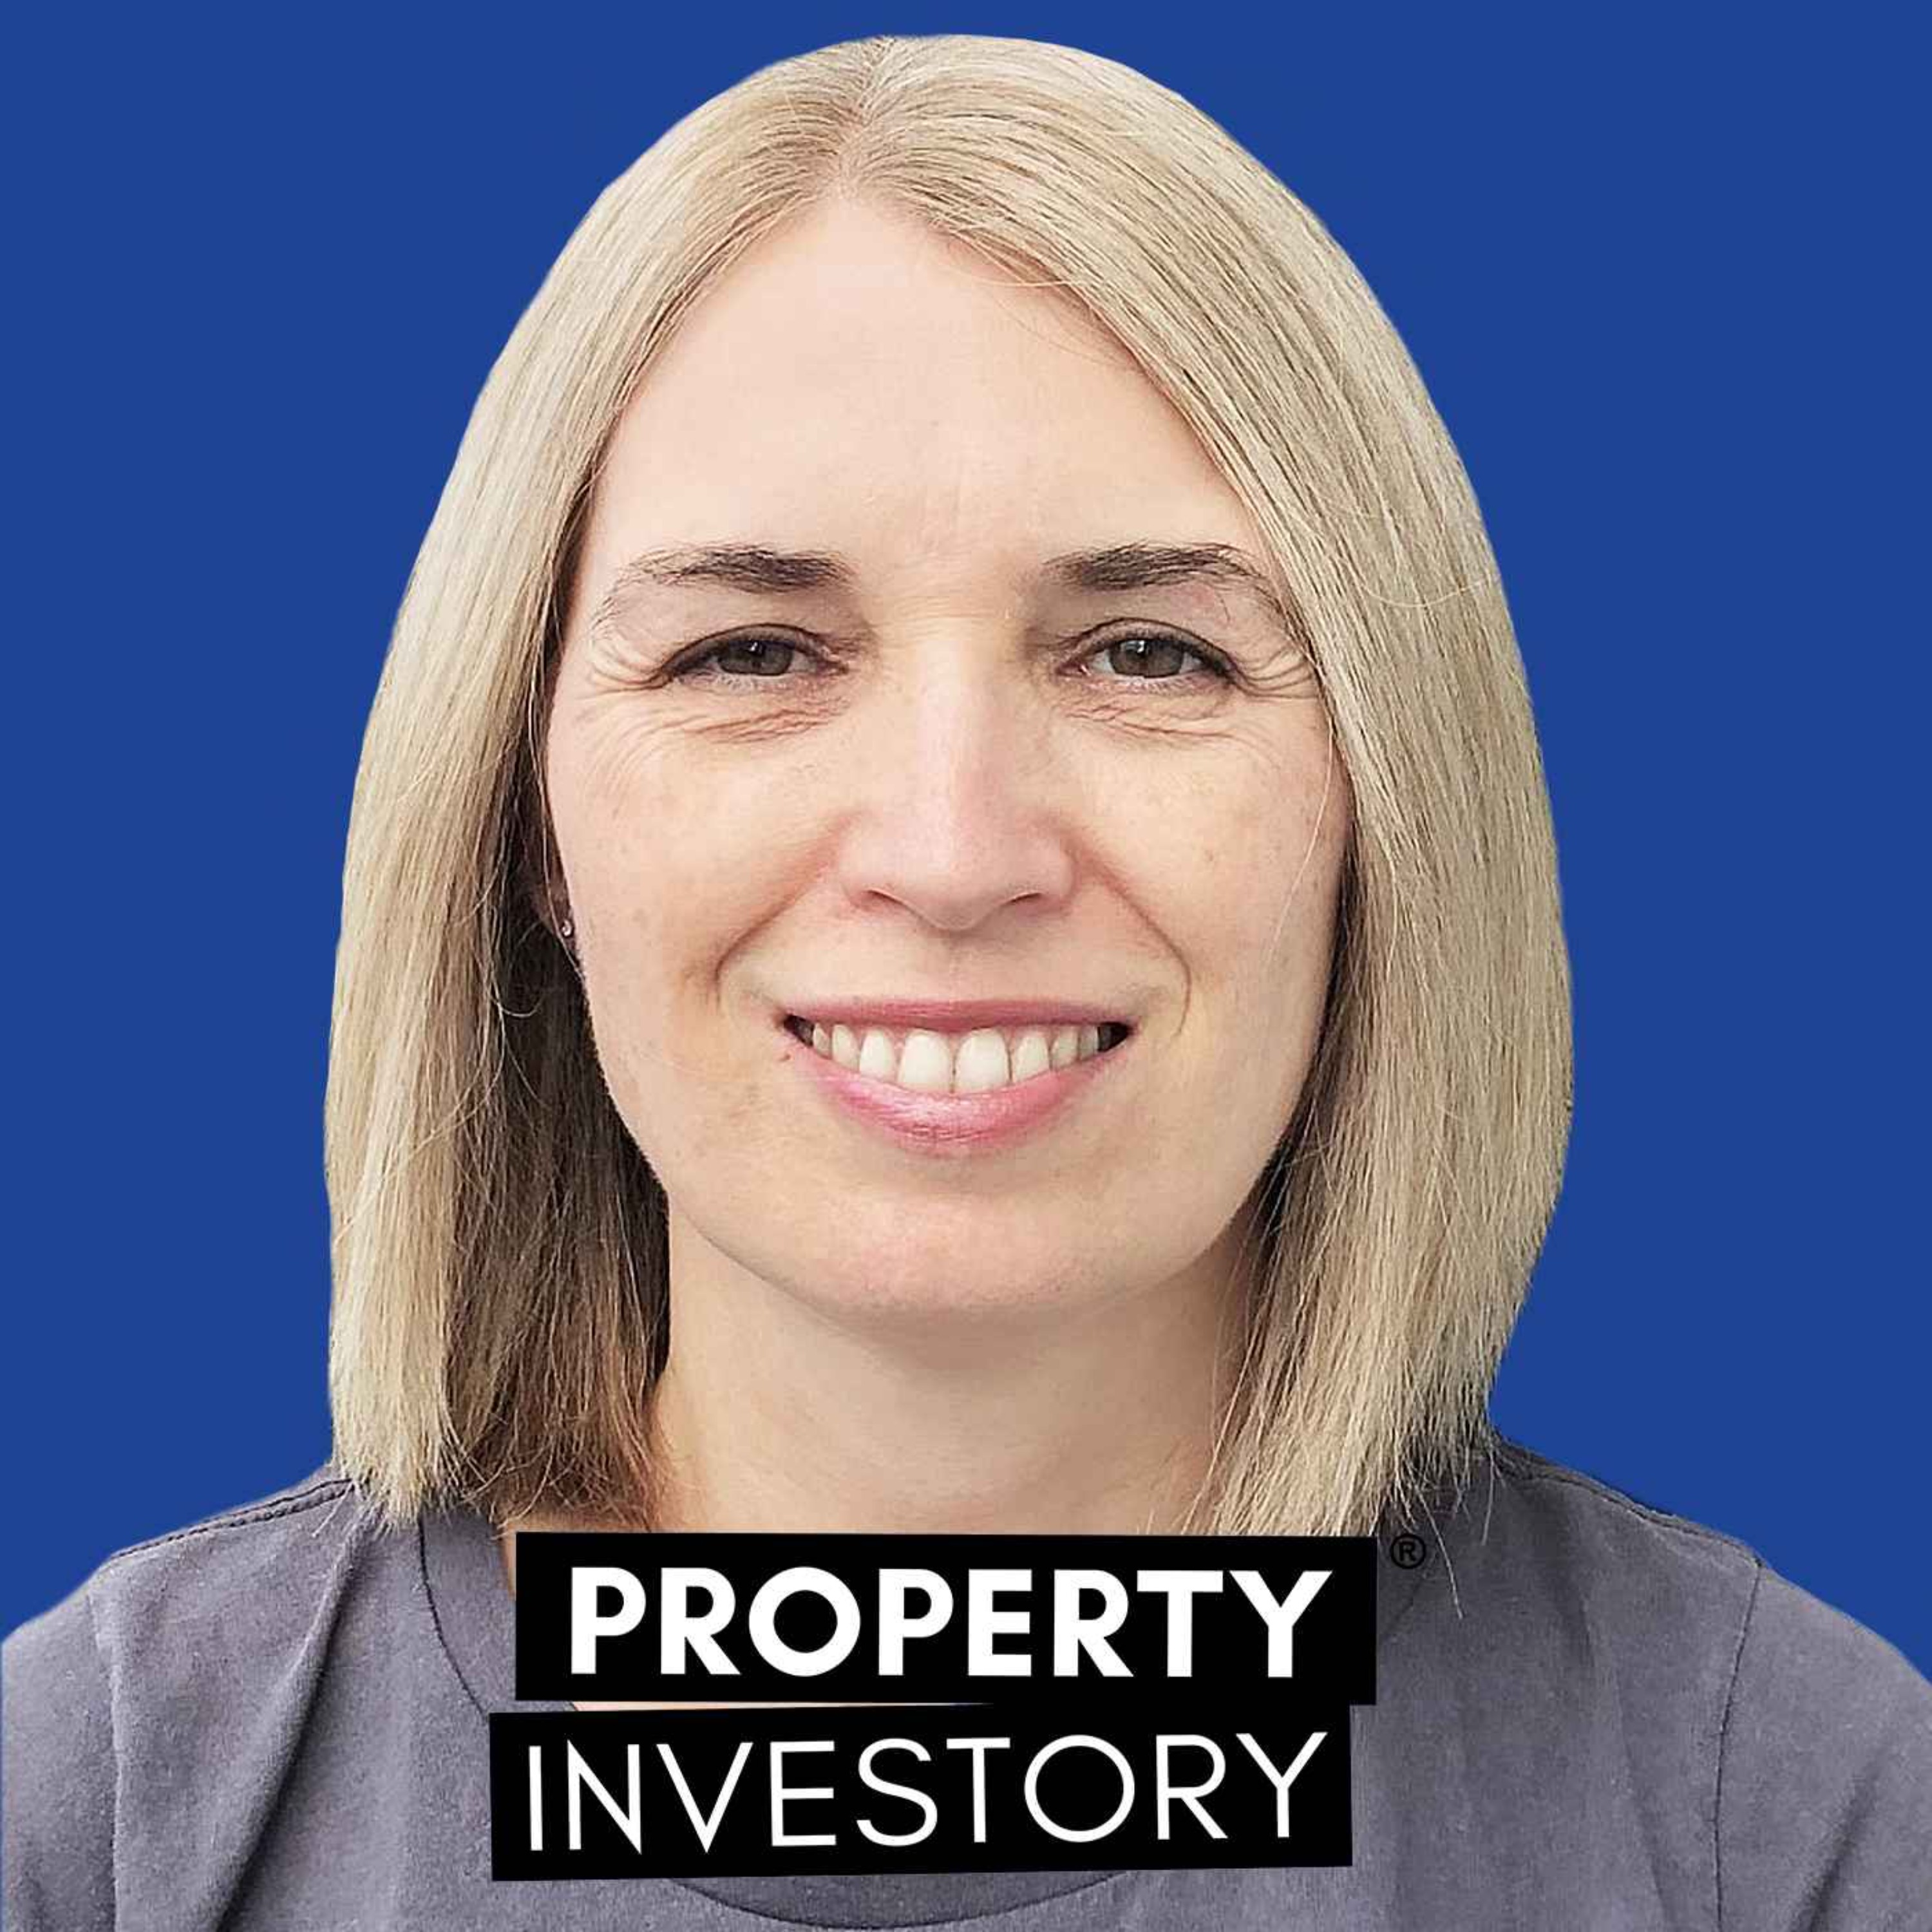 Lesley Smith - Subdivision of Land Generates $60,000 in Profit